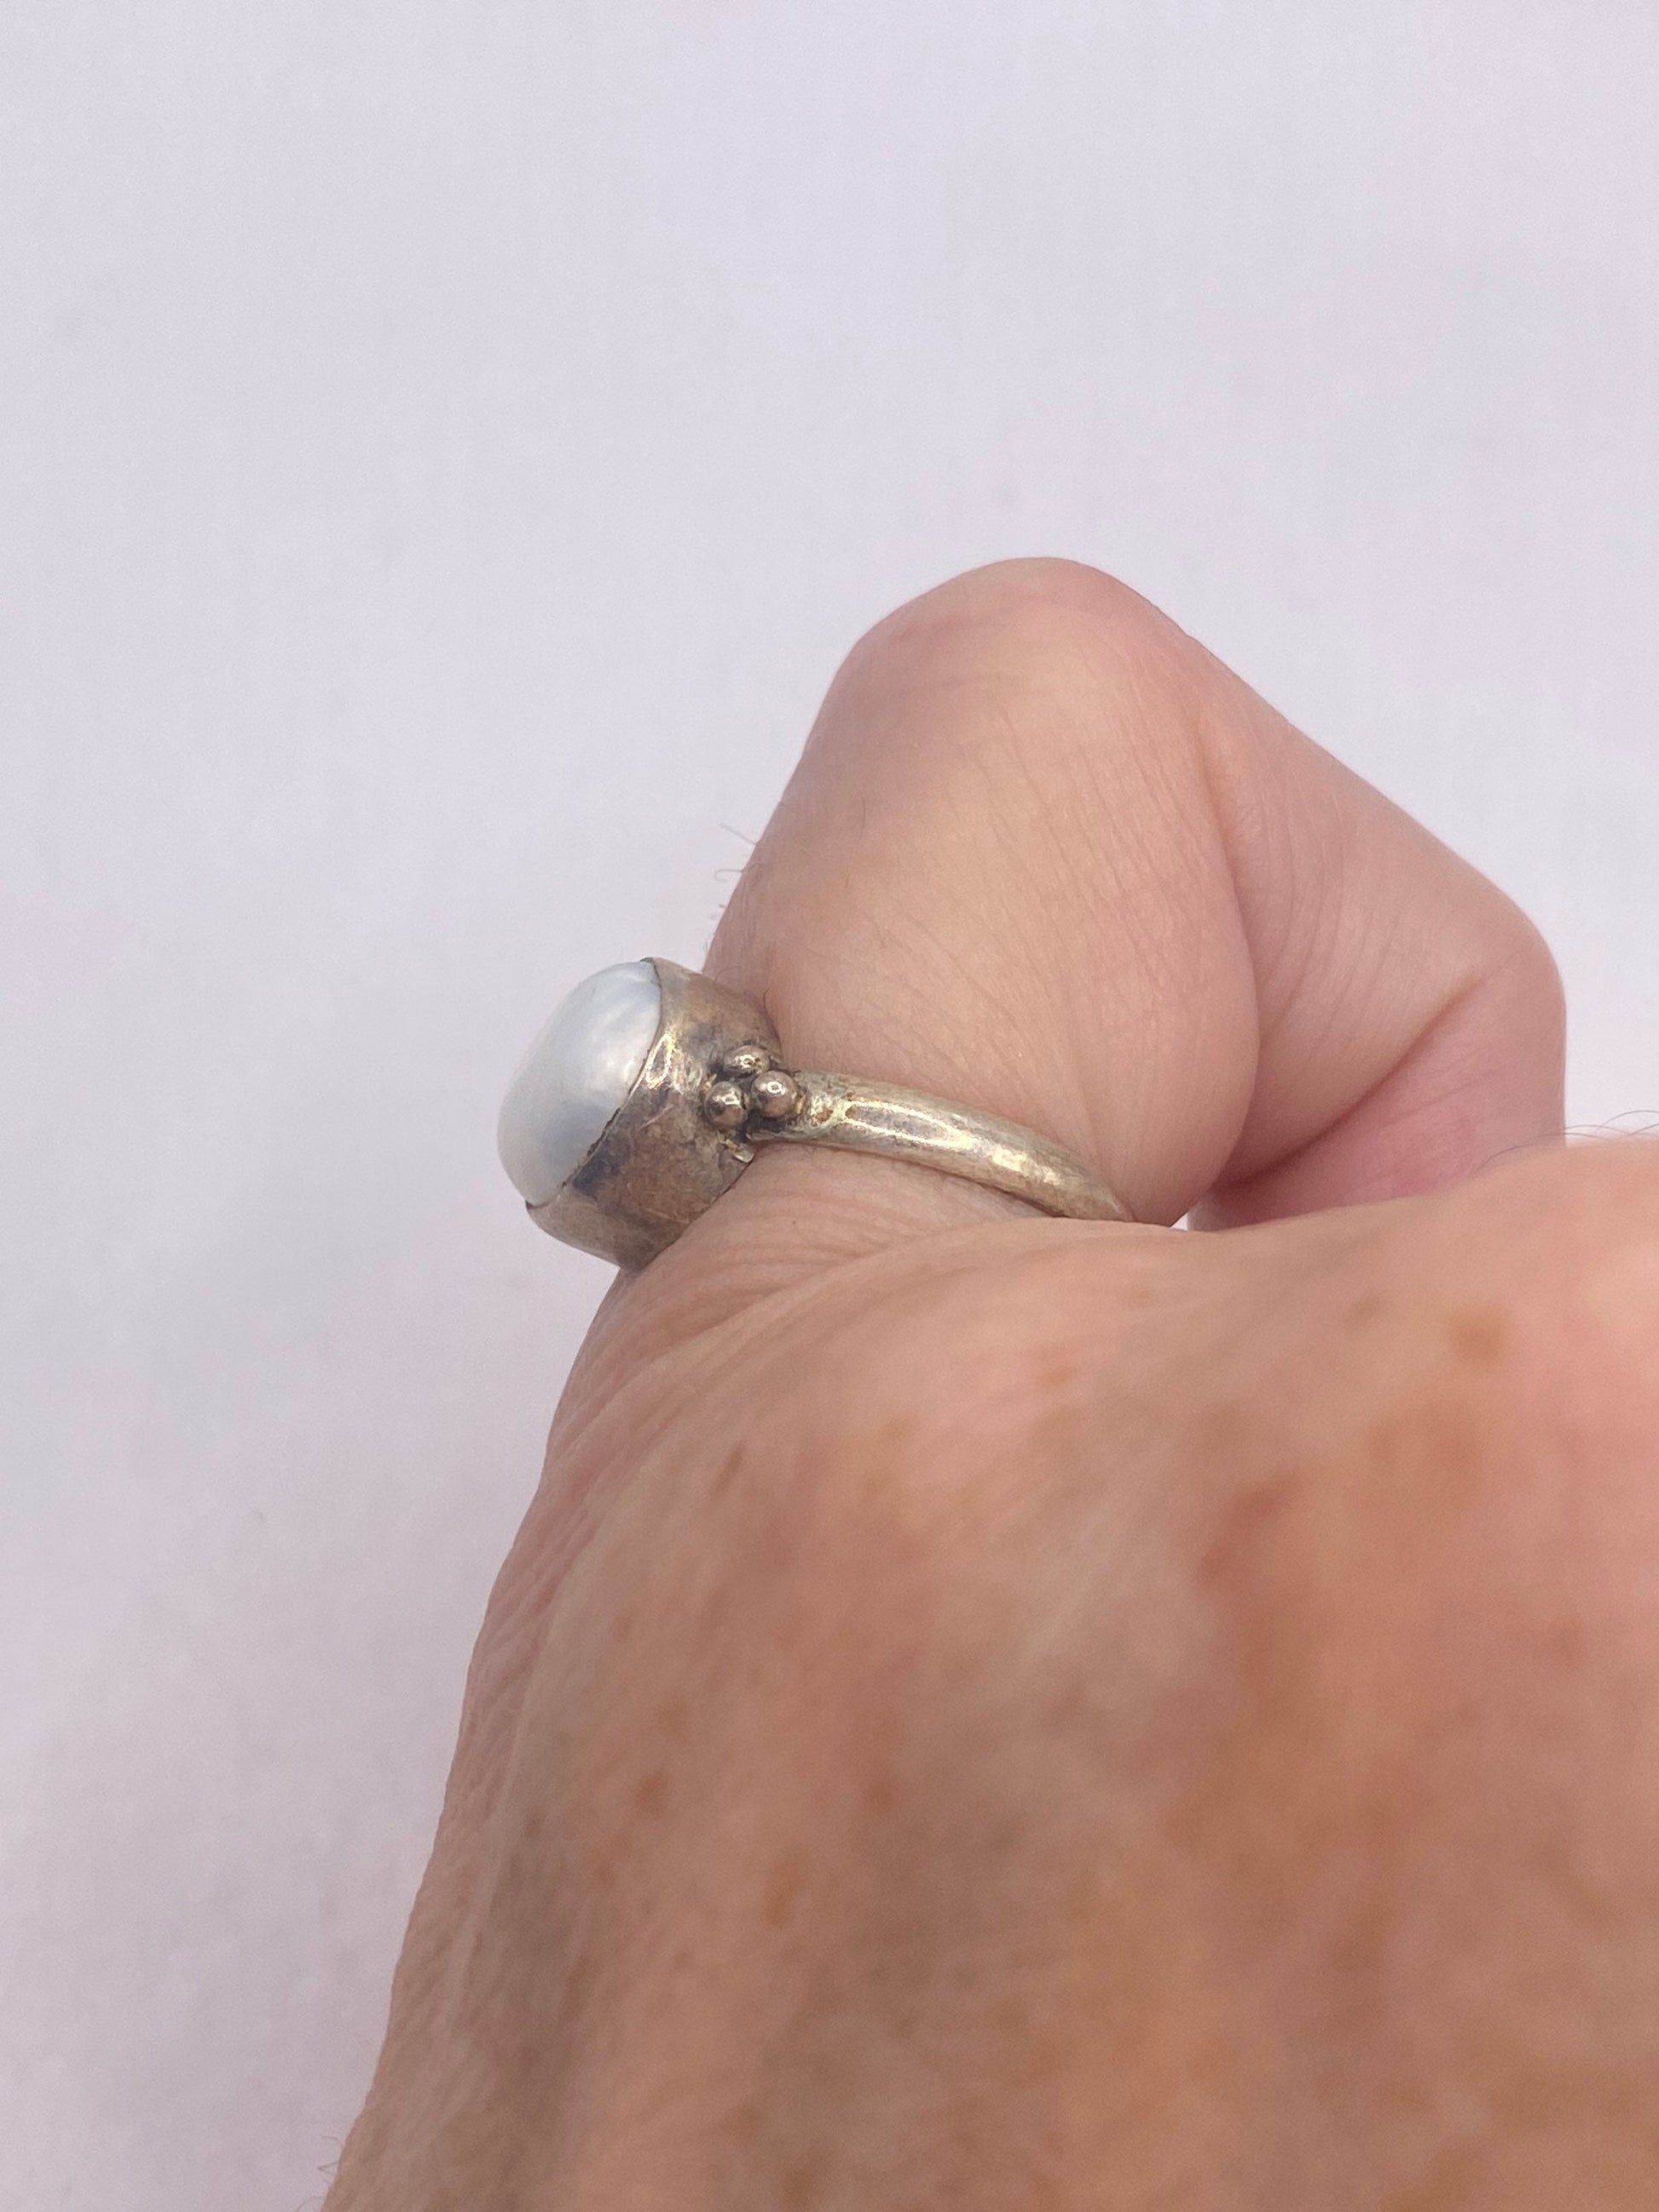 Vintage White Genuine Pearl Silver Cocktail Ring